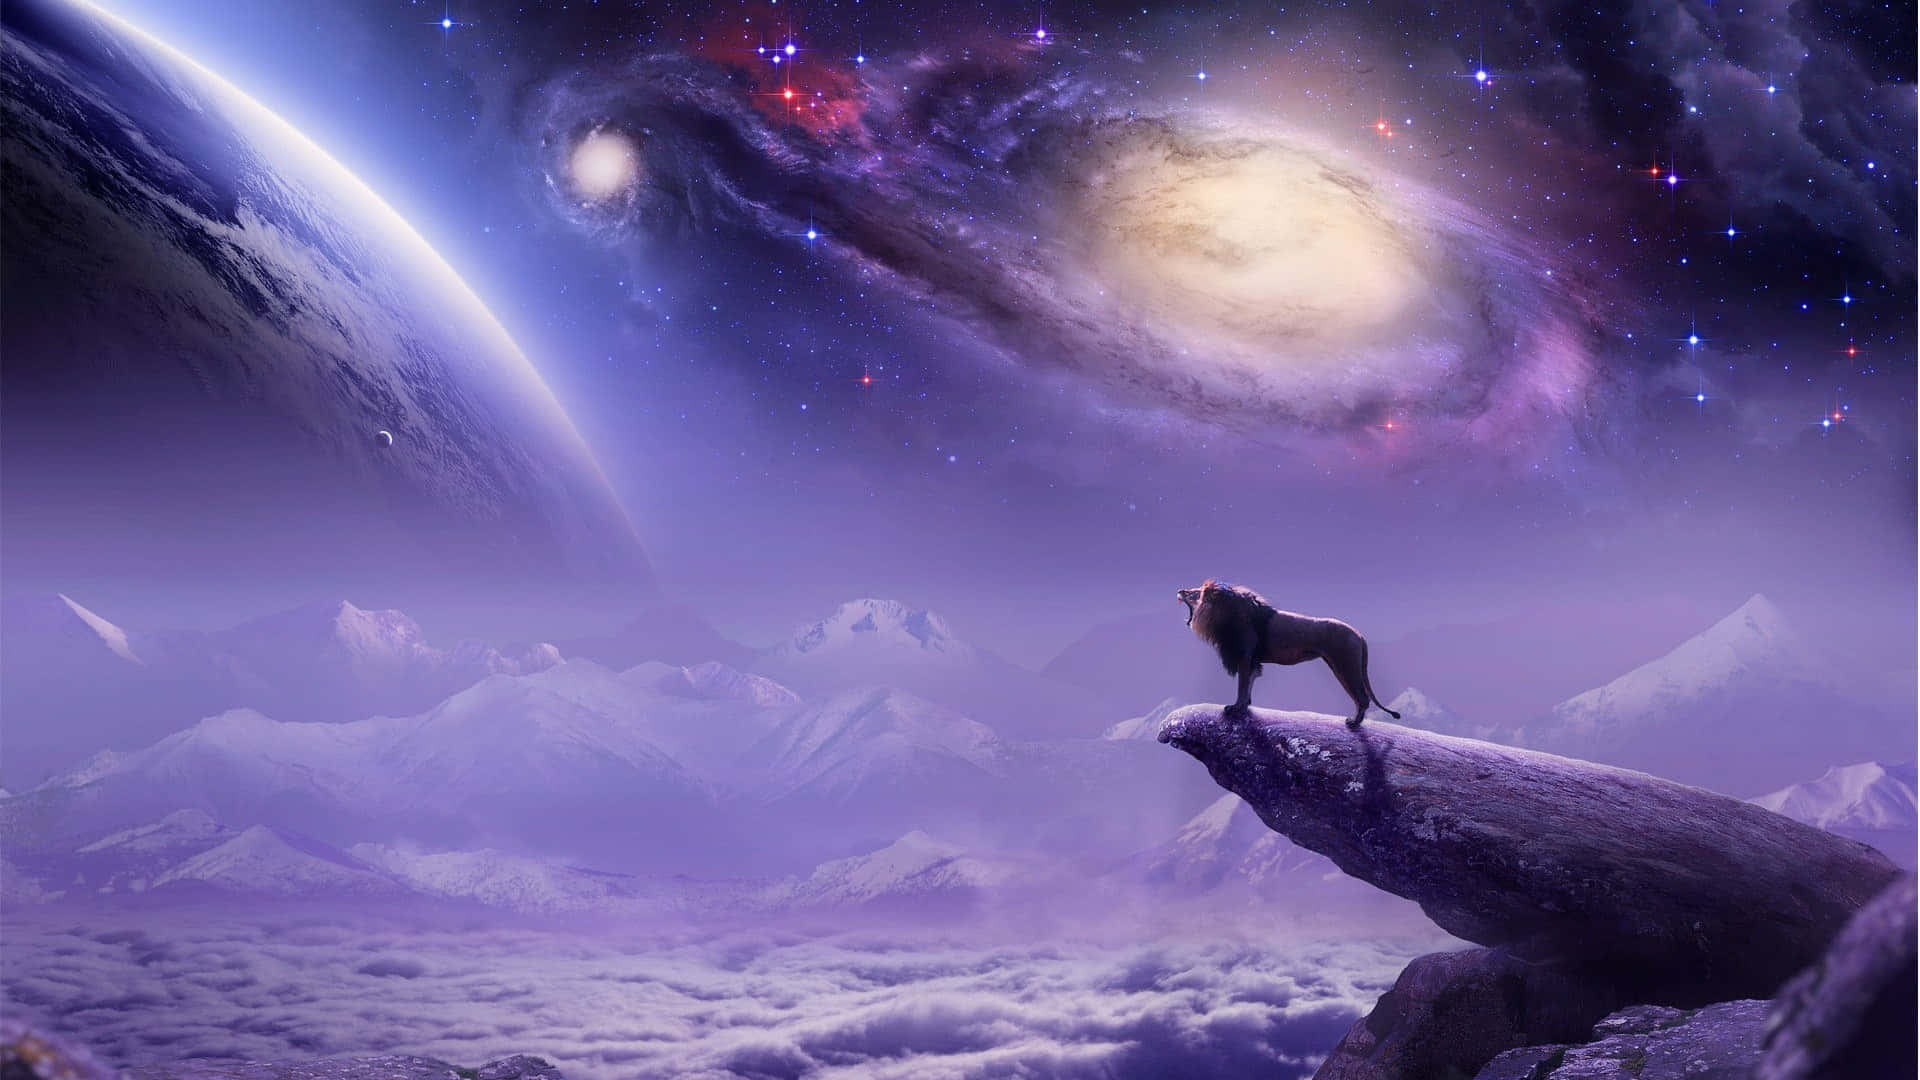 Discover a world of Unimaginable Possibilities in Fantasy Space Wallpaper